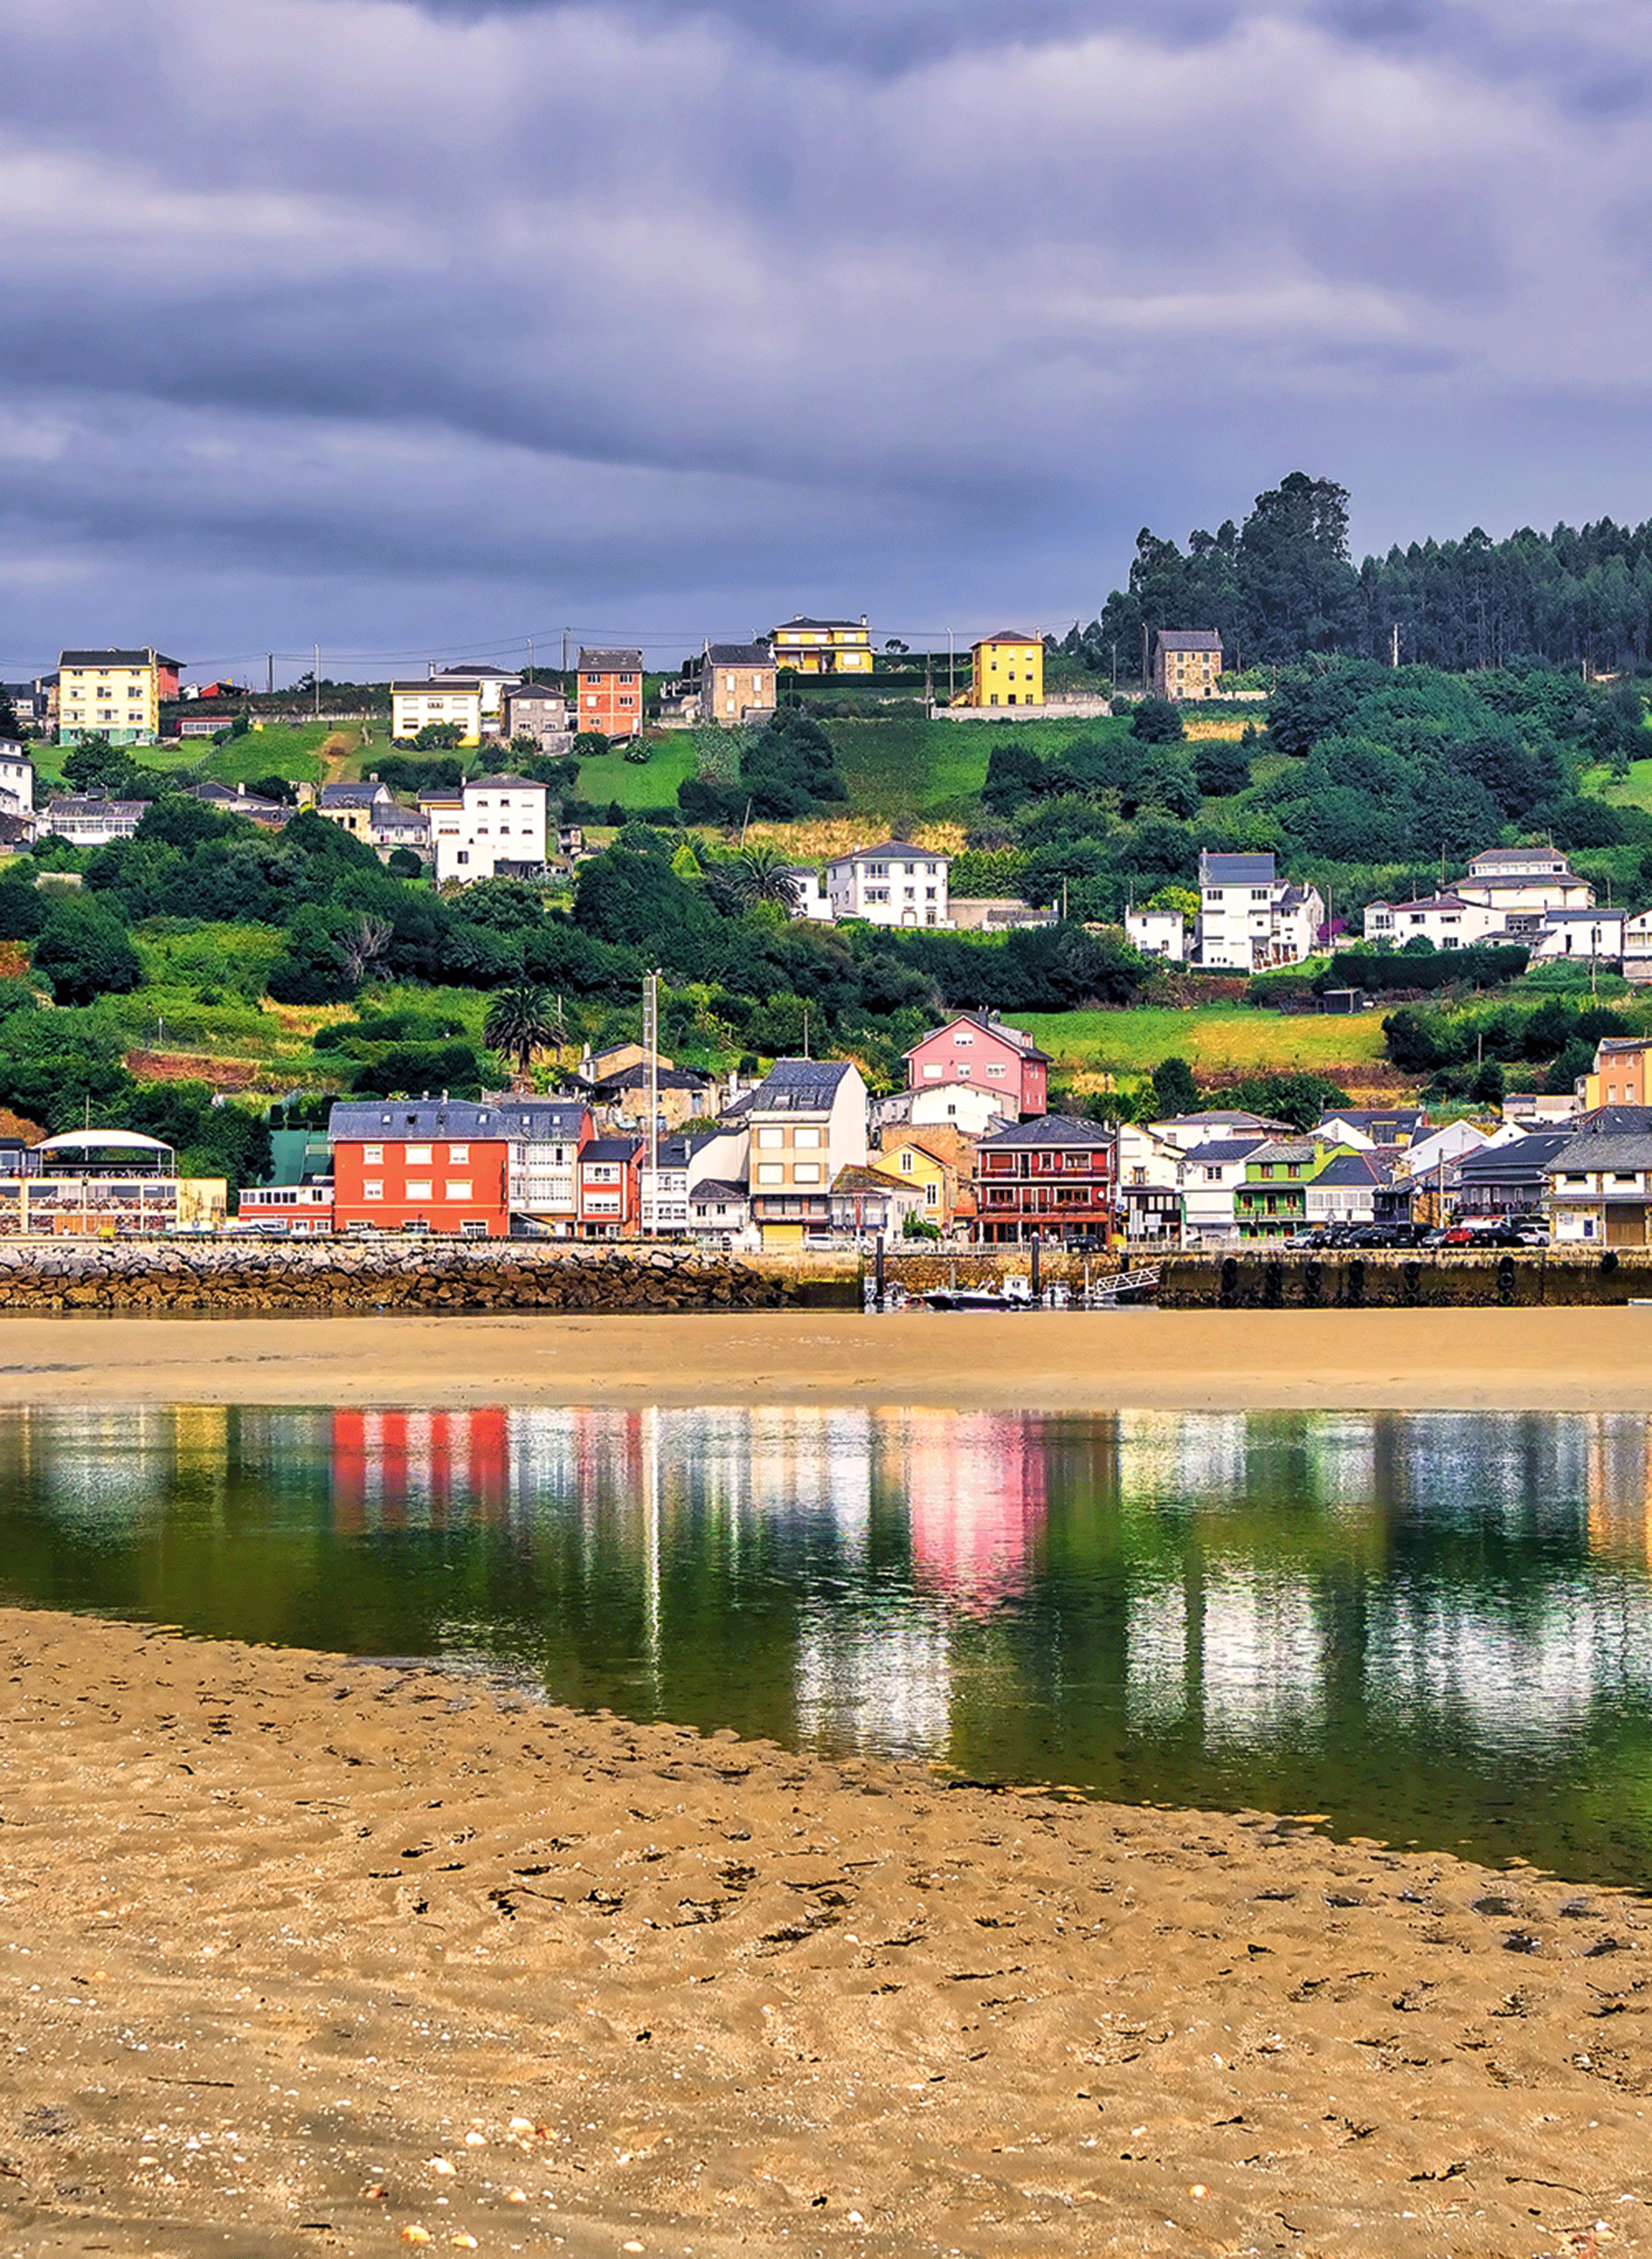 Picturesque sights like the fishing village of Porto do Barqueiro are not uncommon in Galicia.